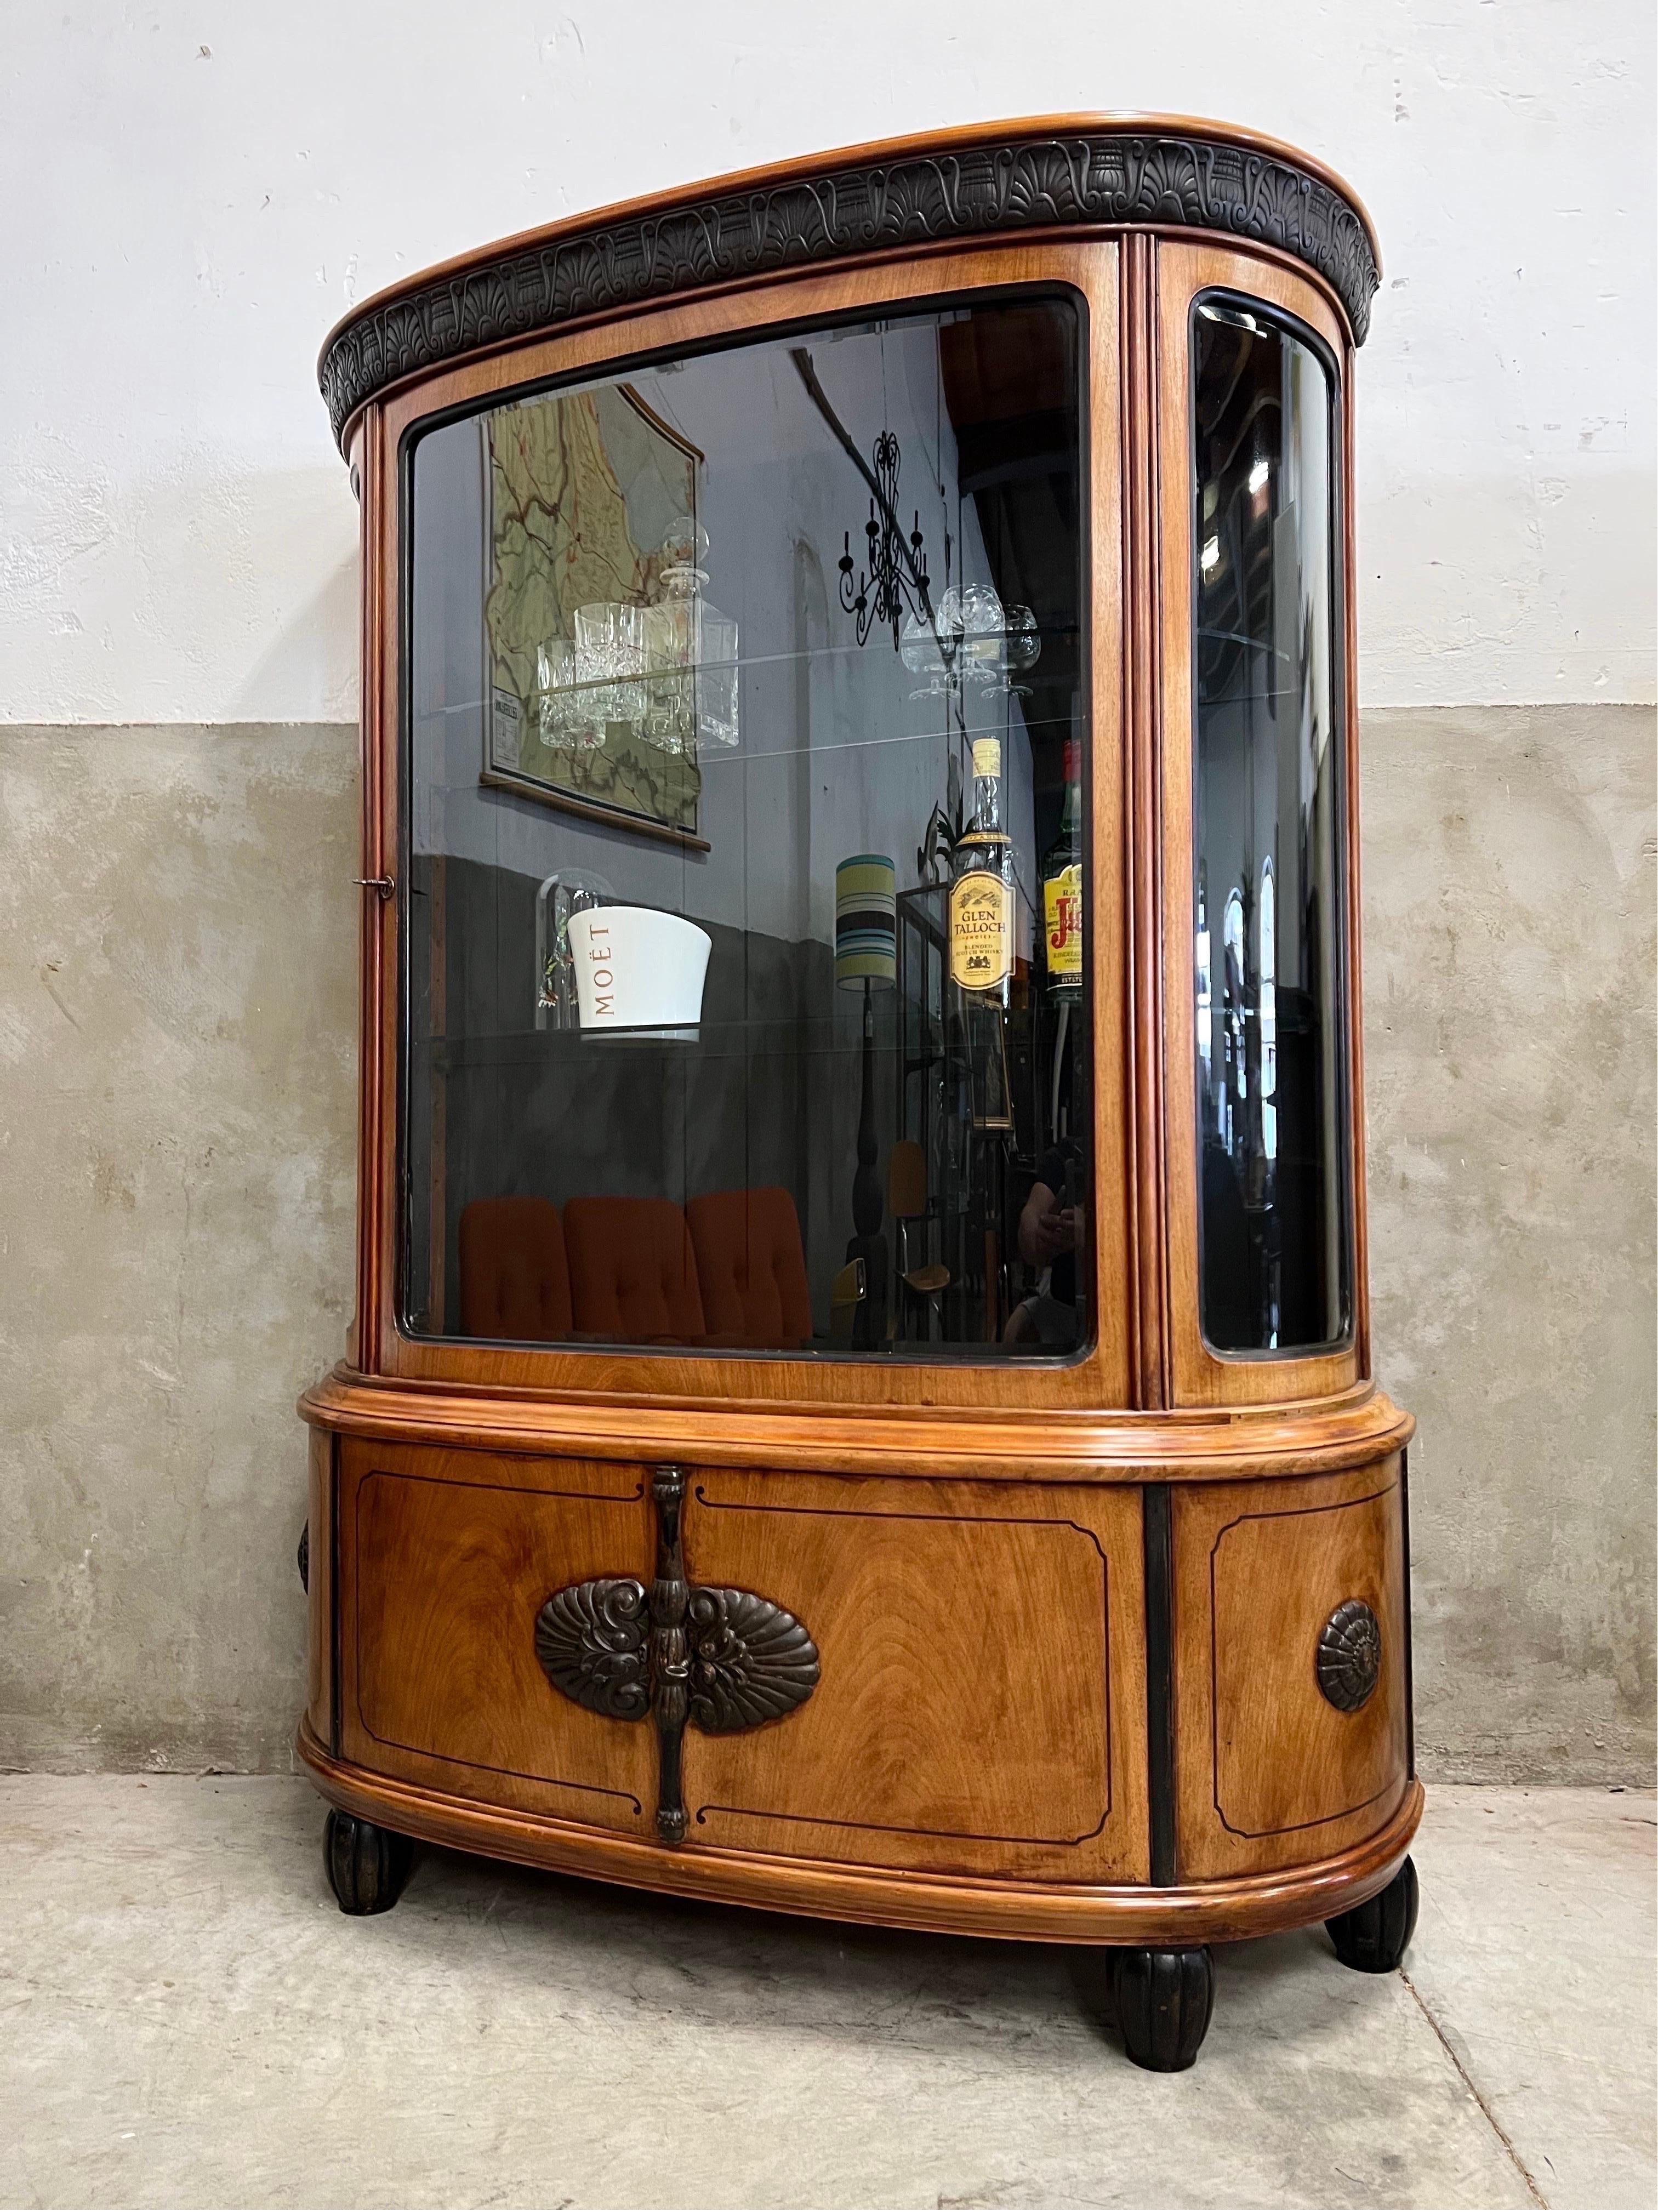 This Art Deco Beverage cabinet, display cabinet is a gem in itself and there is only 1 of them

Real piece of craftsmanship made around 1910-1920 in with its curved glass doors and sides, the glass itself is also cut.

Beautiful ornaments and